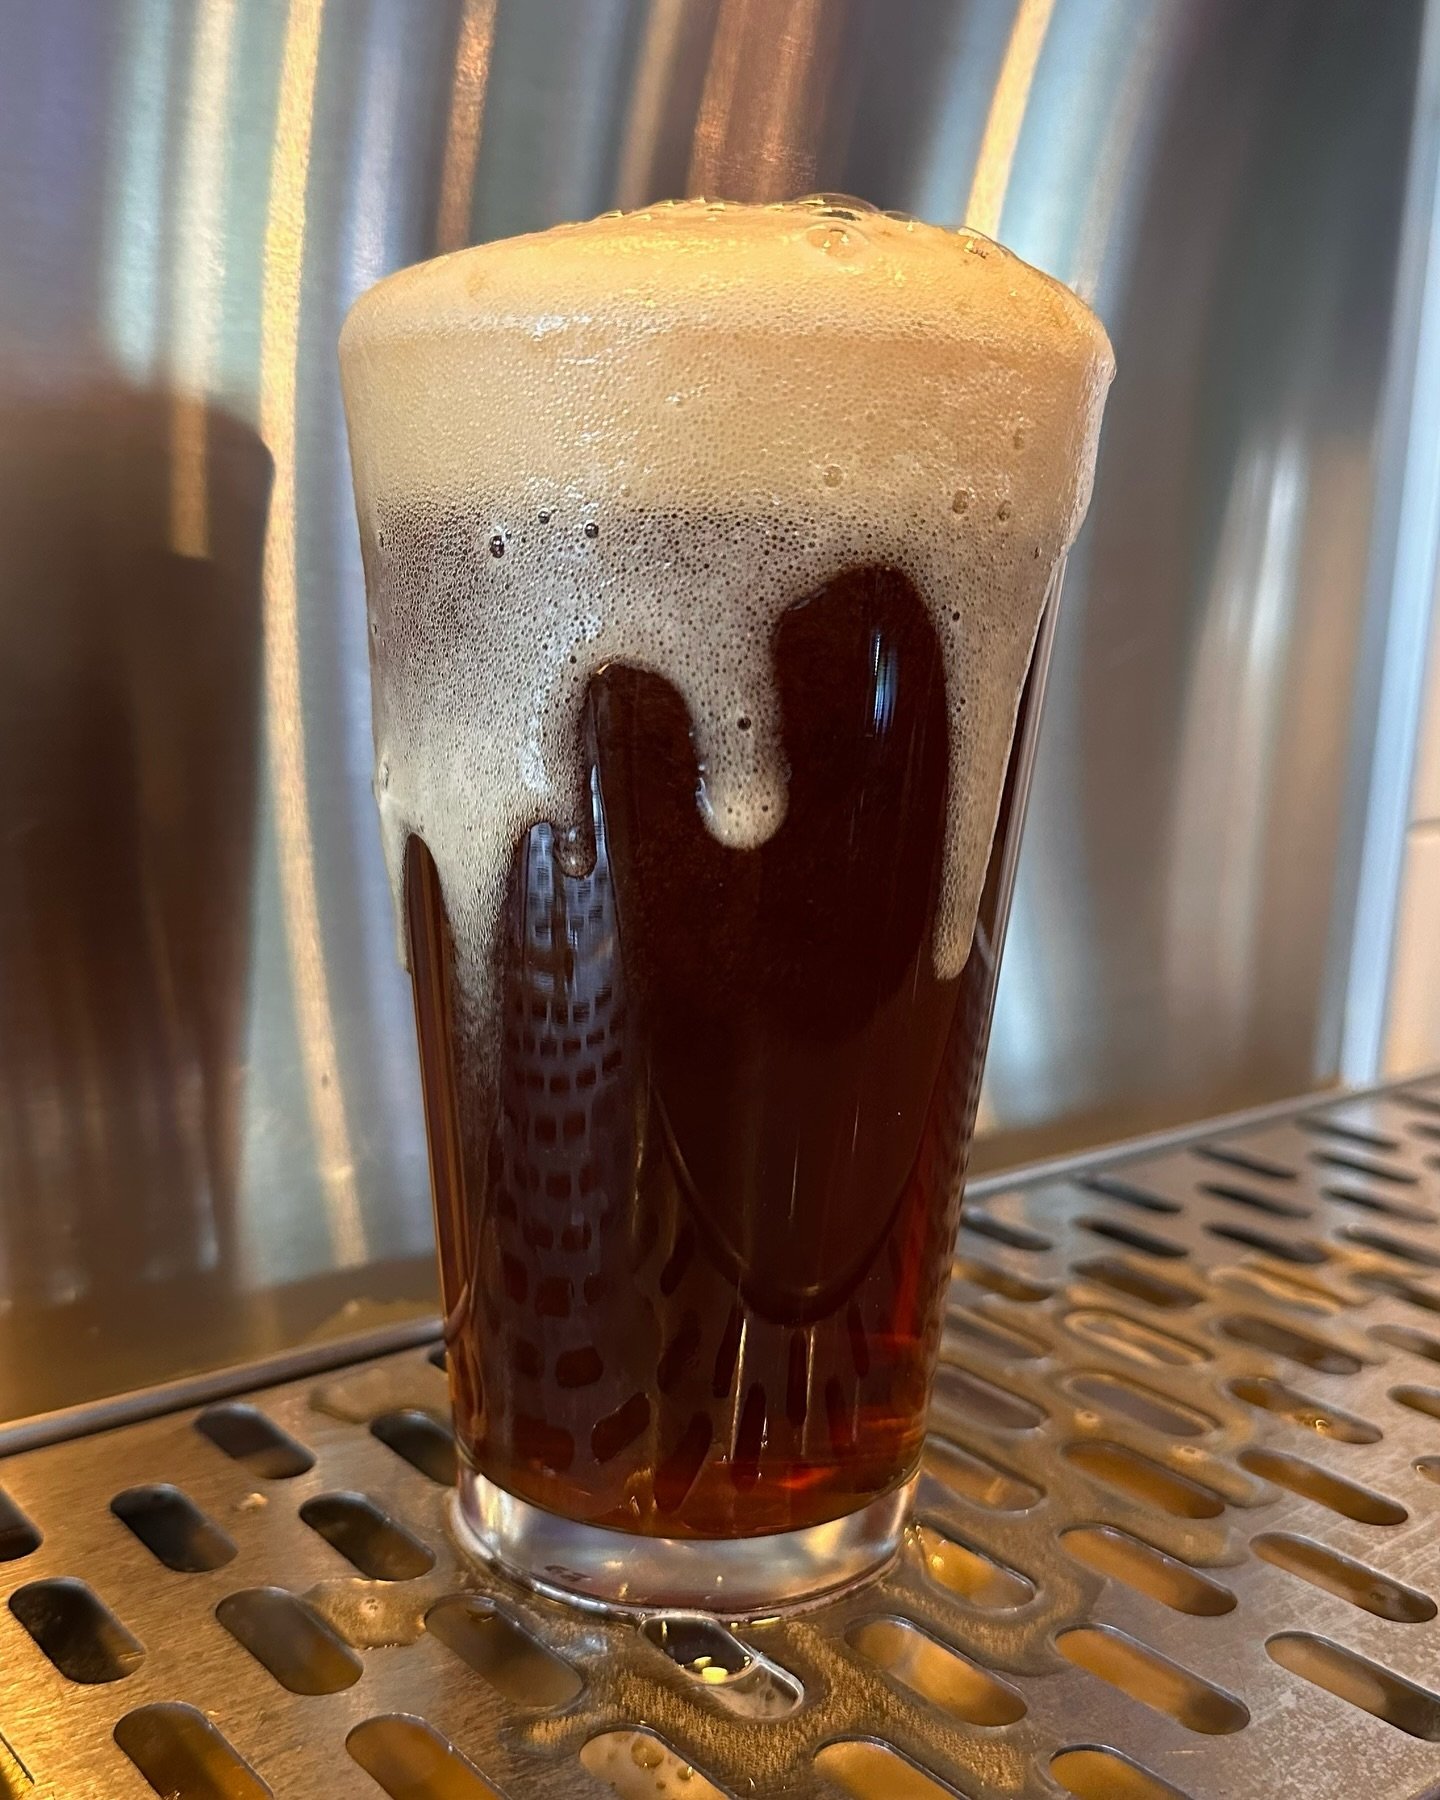 Brown Eyed Girl English Brown Ale is now on tap! A classic English style brown ale with toffee and biscuit malty character, this is a smooth beer throughout with a moderately sweet finish. Stop by for a pint of this tasty brown ale today! Cheers!

#b